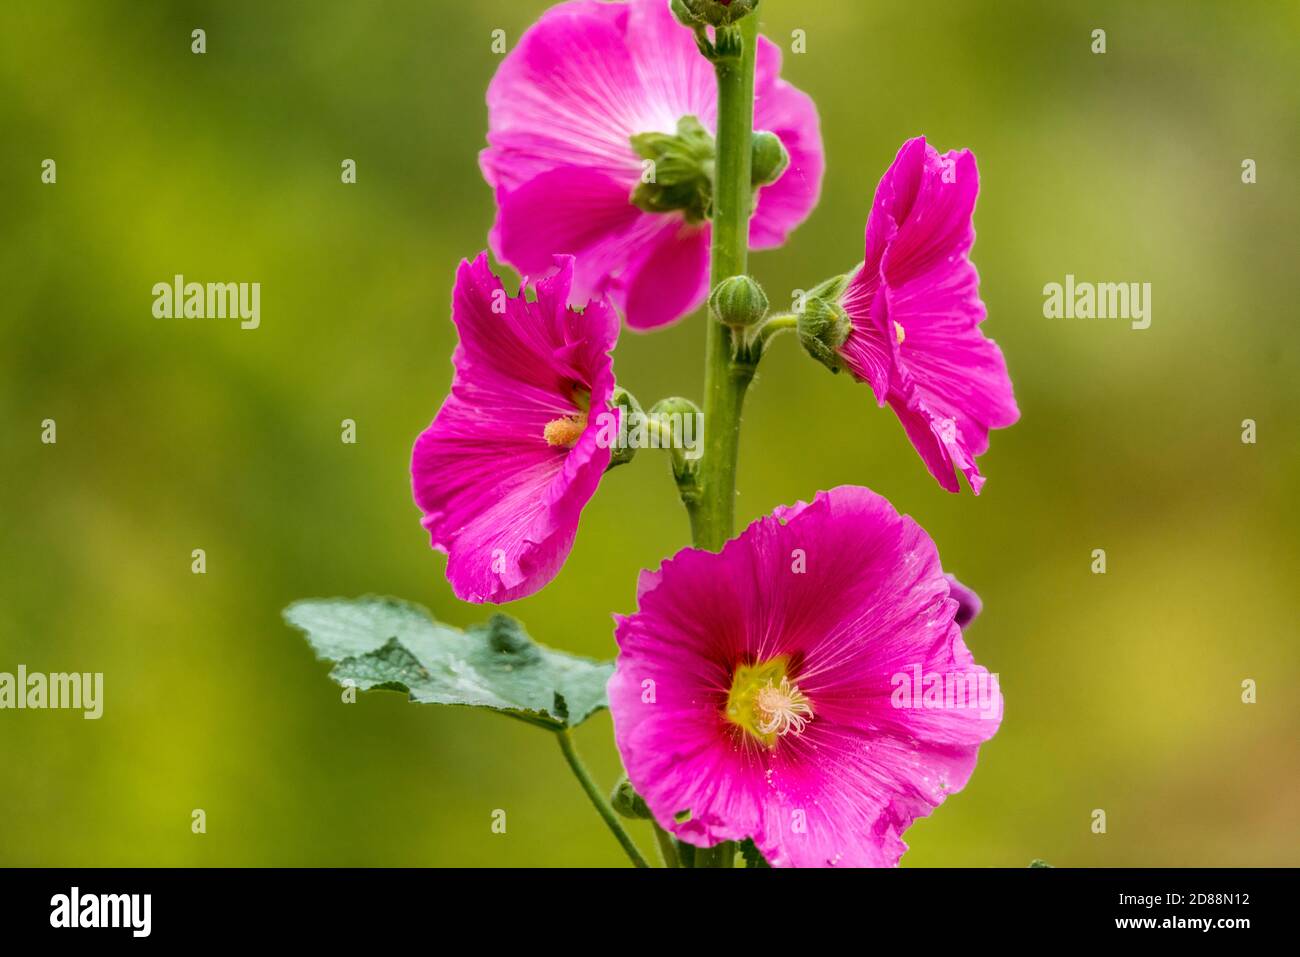 Closeup picture of Holyock pink flower in green background in a garden Stock Photo